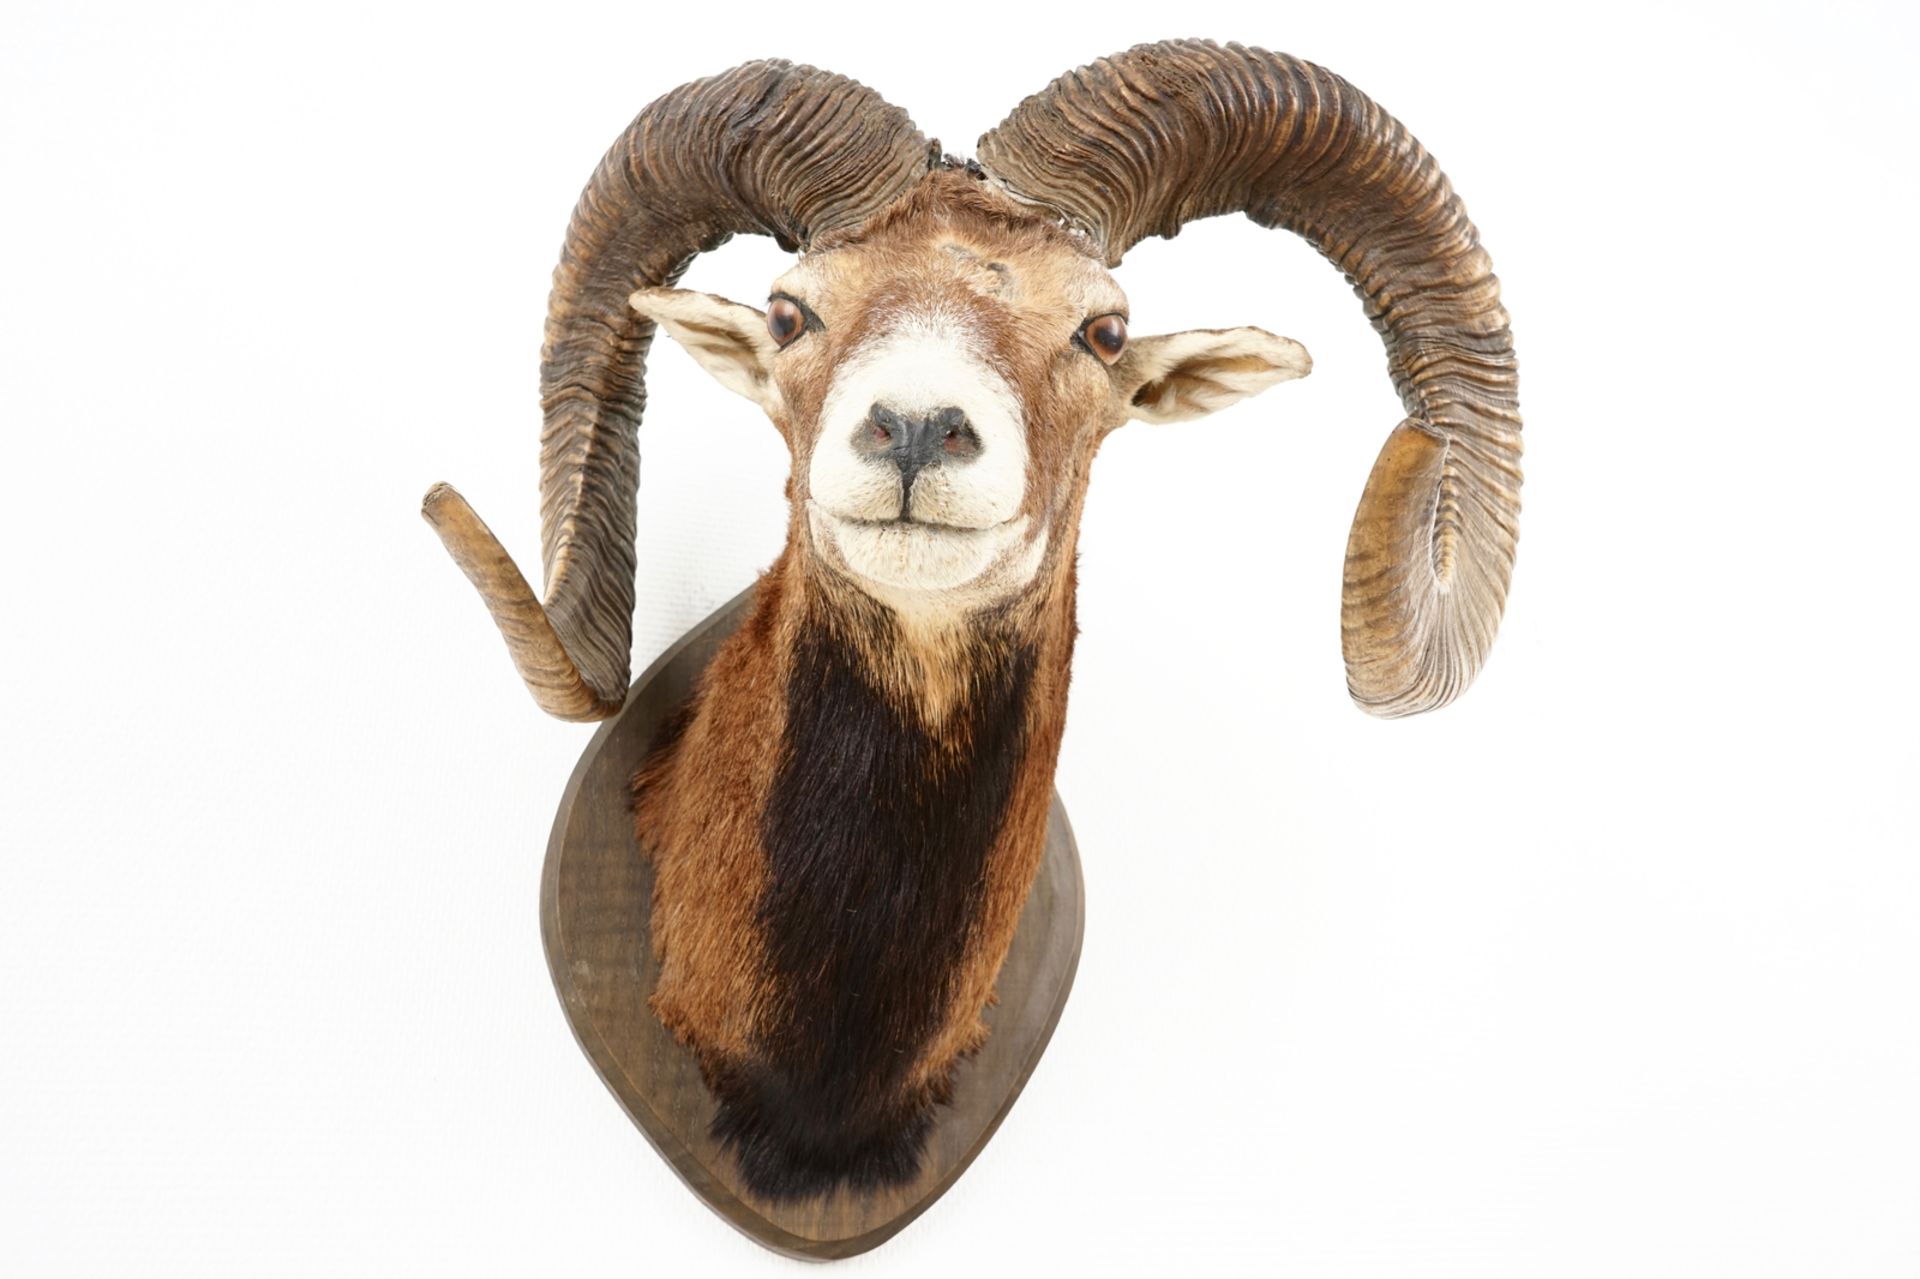 A bust of a mouflon, mounted on wood, taxidermy, late 20th C. L.: 44 cm - H.: 55 cm Condition - Image 6 of 7